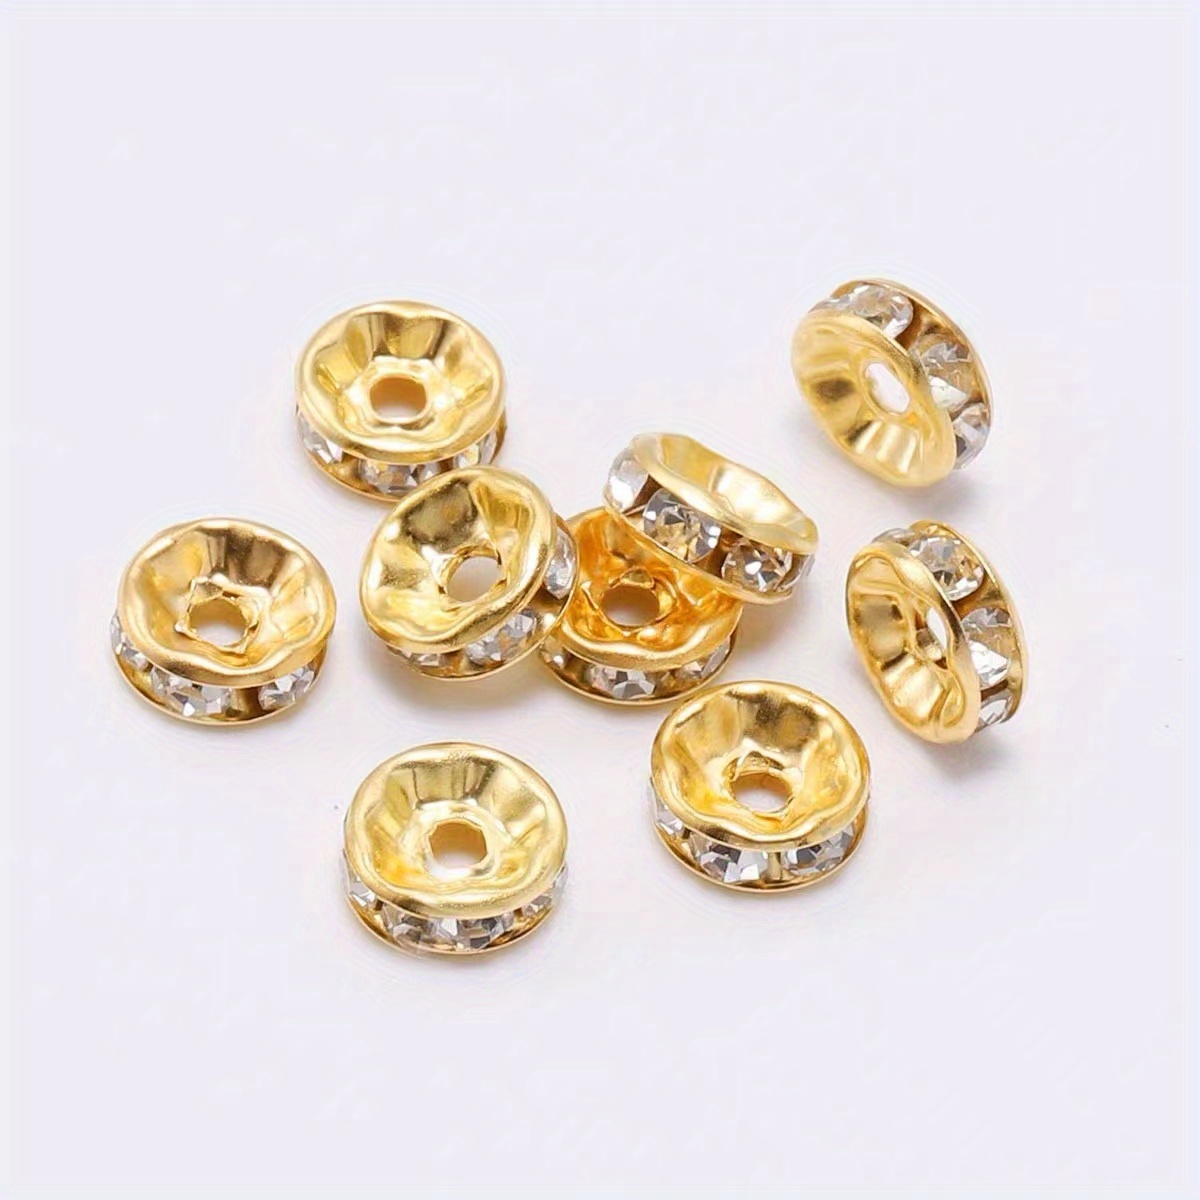 900 Pieces Rondelle Spacer Beads for Jewelry Making, 8mm Rhinestone Spacer  Beads Crystal Bead Spacers for Bracelets, Focal Beads for Pen, 15 Colors